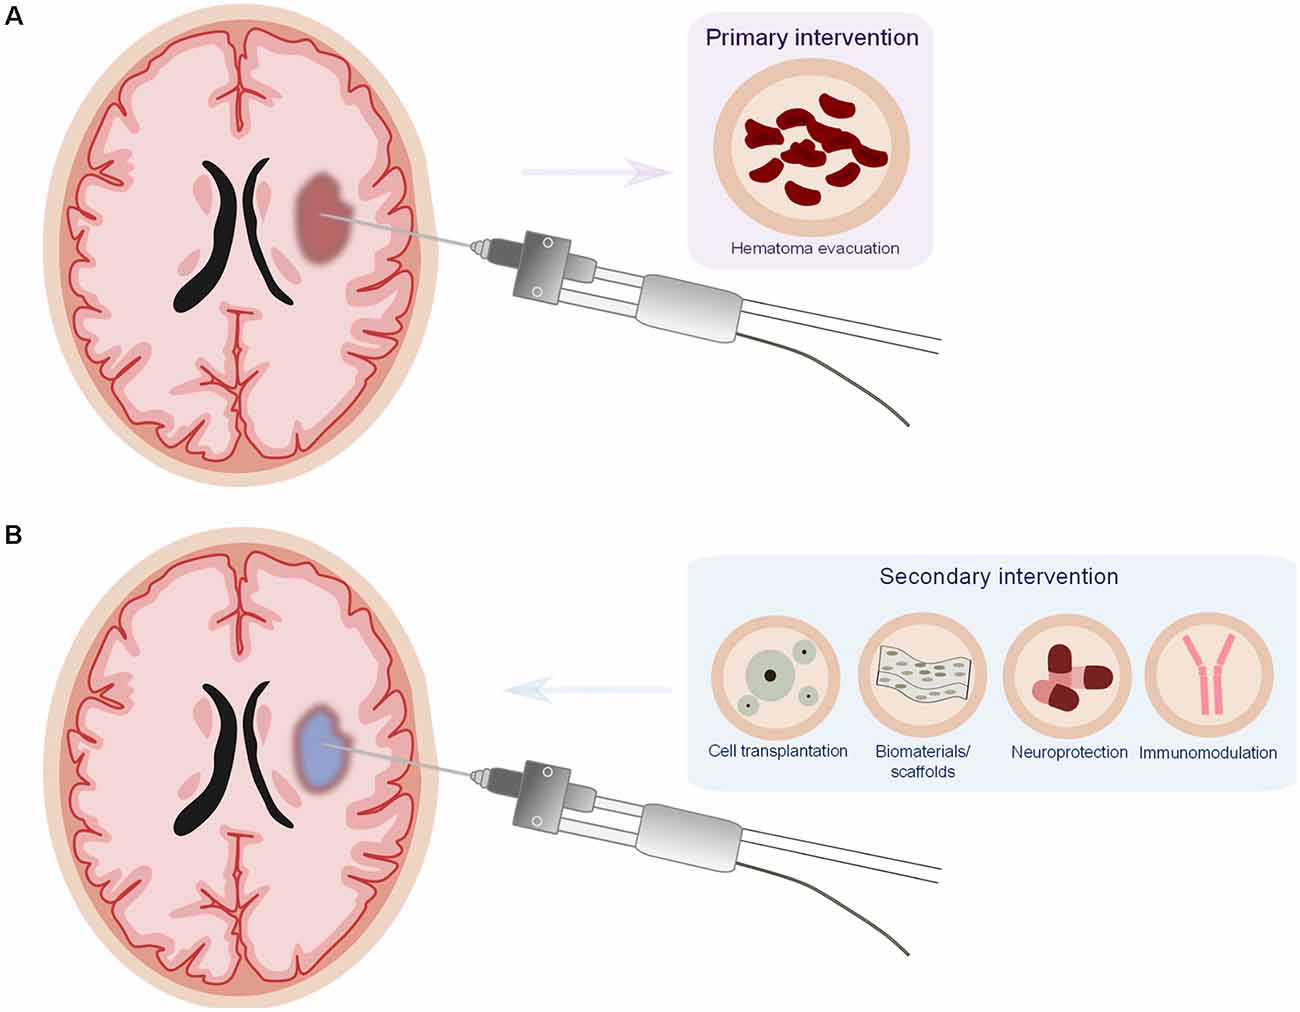 Frontiers | New Mechanistic Insights, Novel Treatment Paradigms, and Progress in Cerebrovascular Diseases Aging Neuroscience